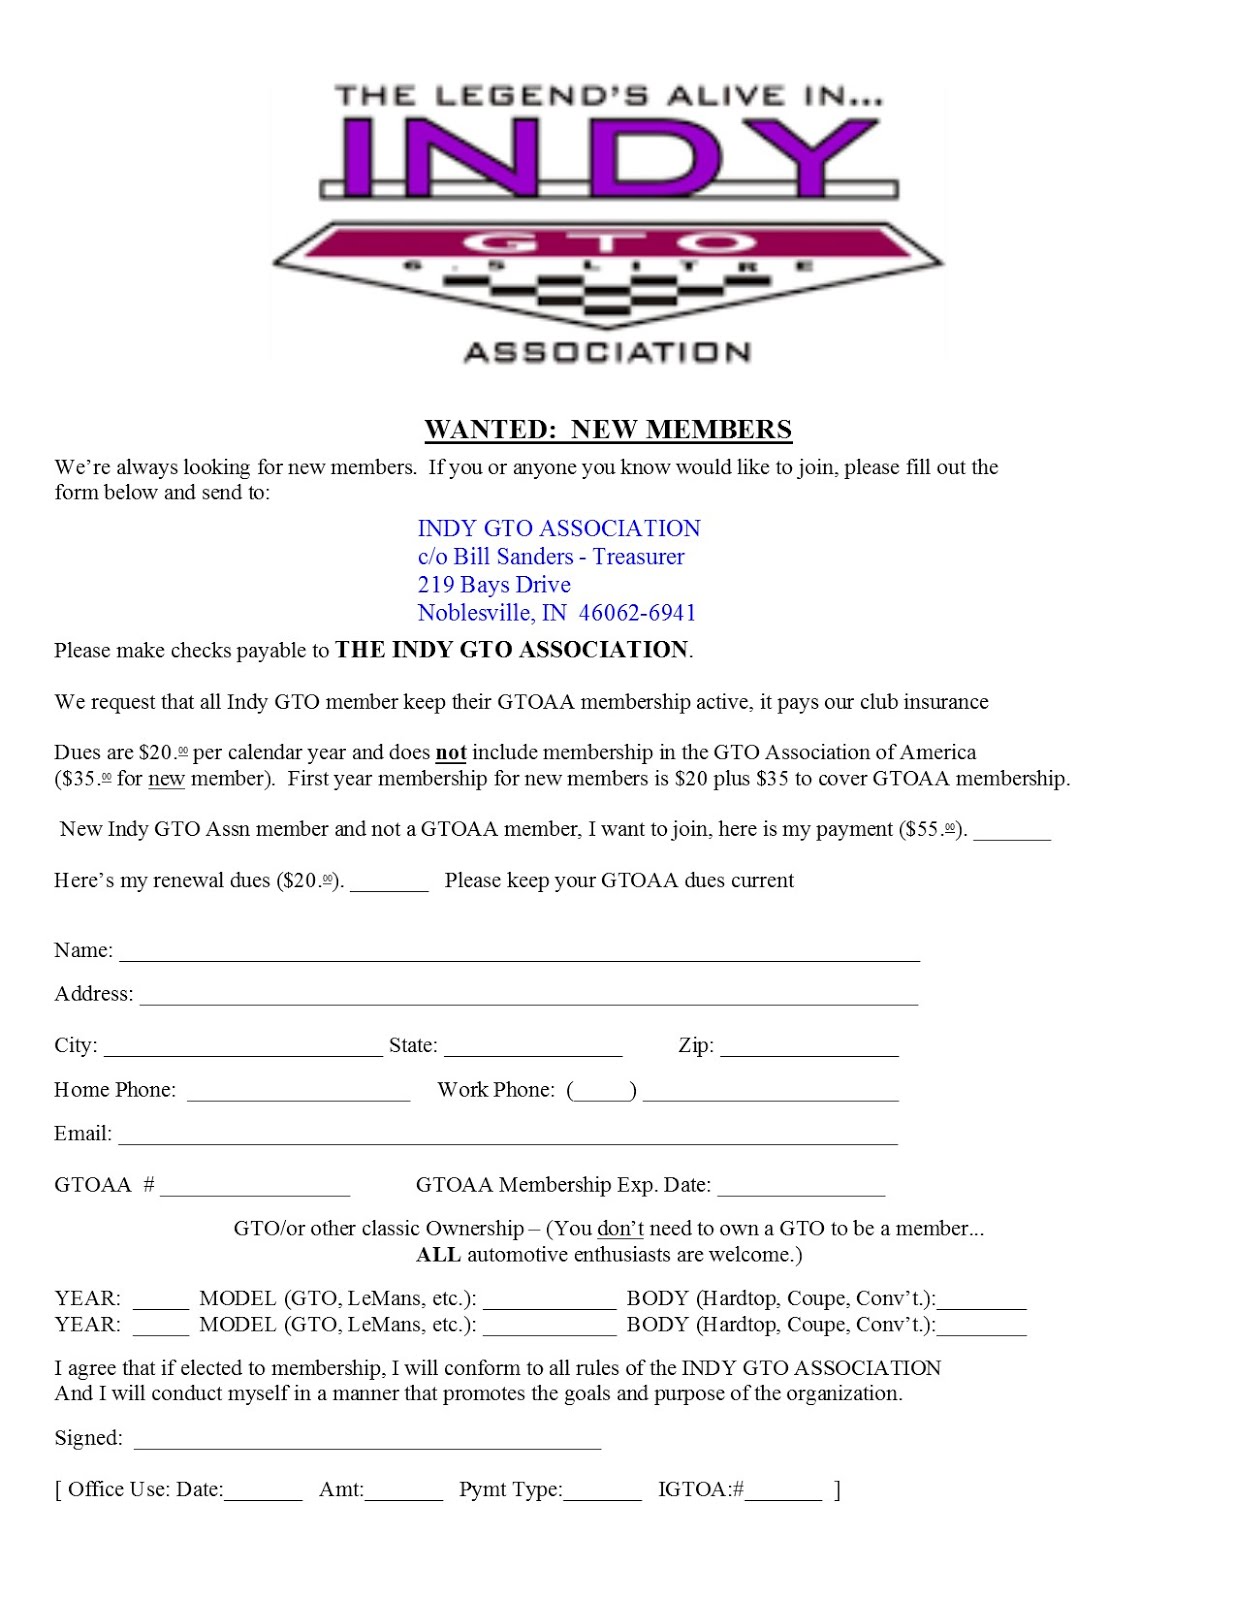 INDY GTO ASSOCIATION MEMBERSHIP FORM   --   Right Click to Open and Print